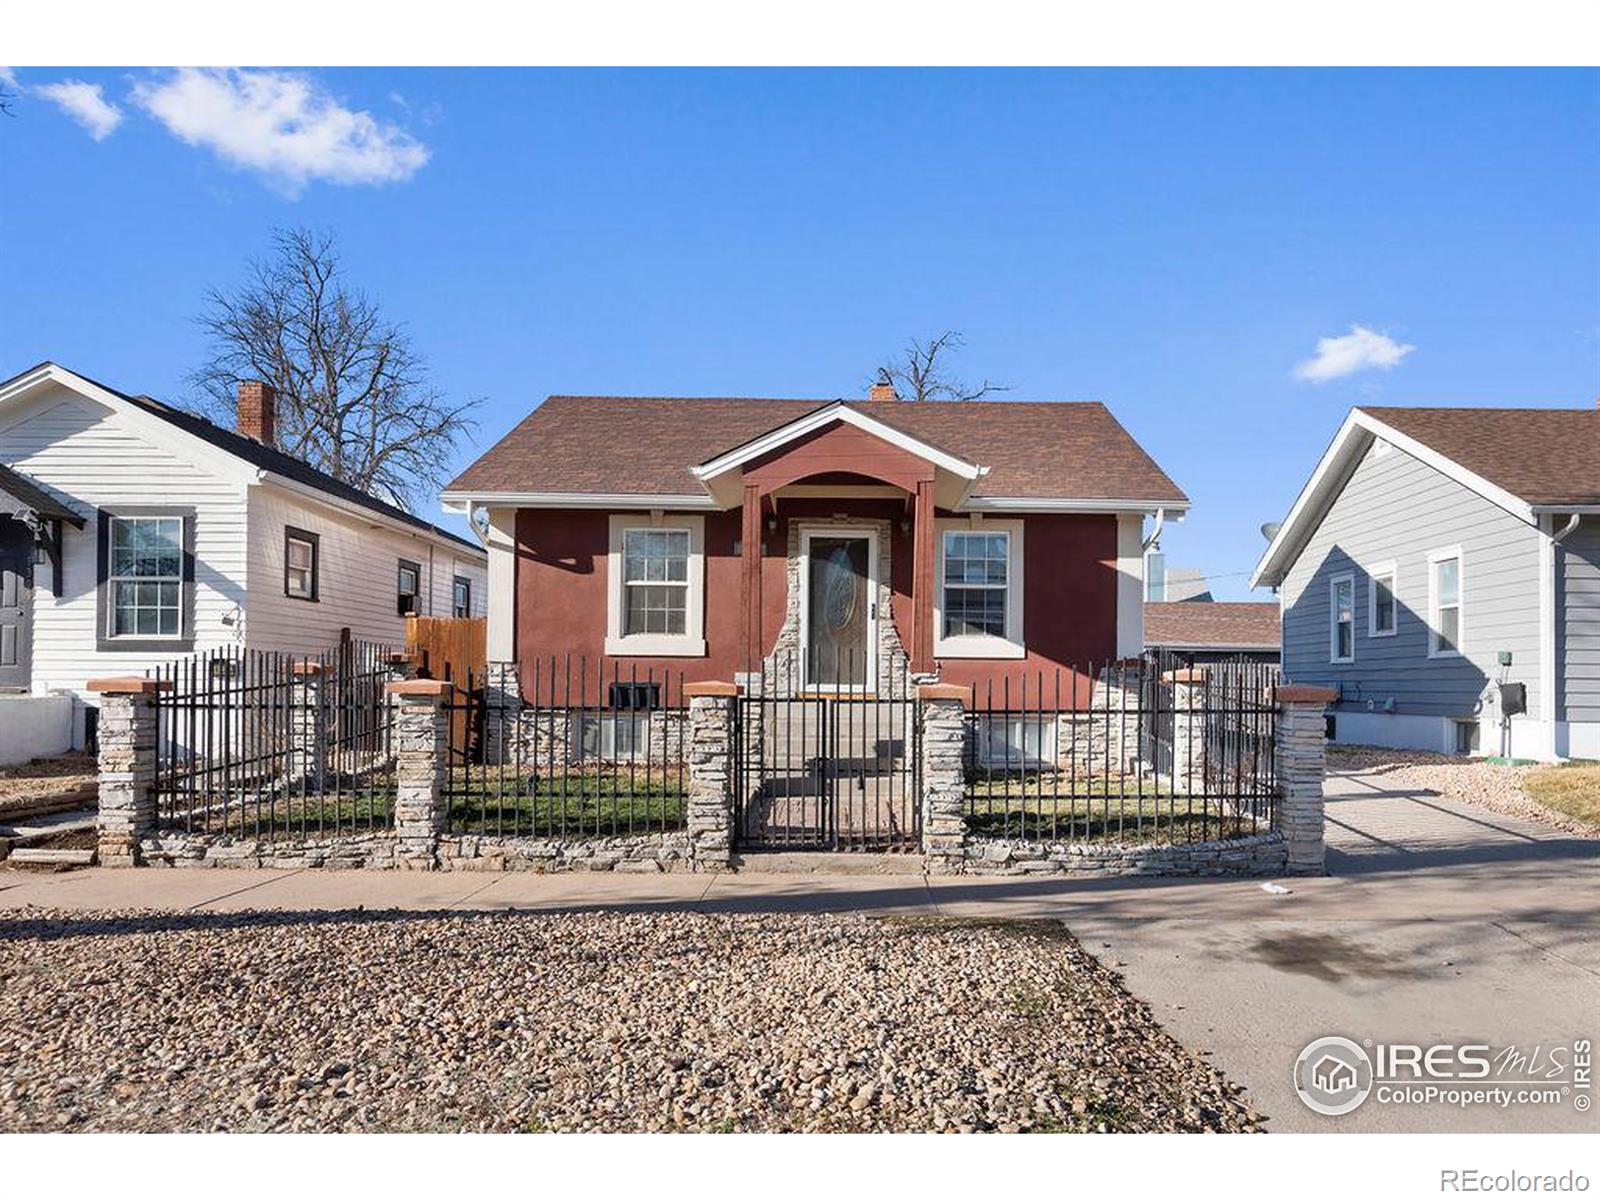 Report Image for 1307  7th Street,Greeley, Colorado